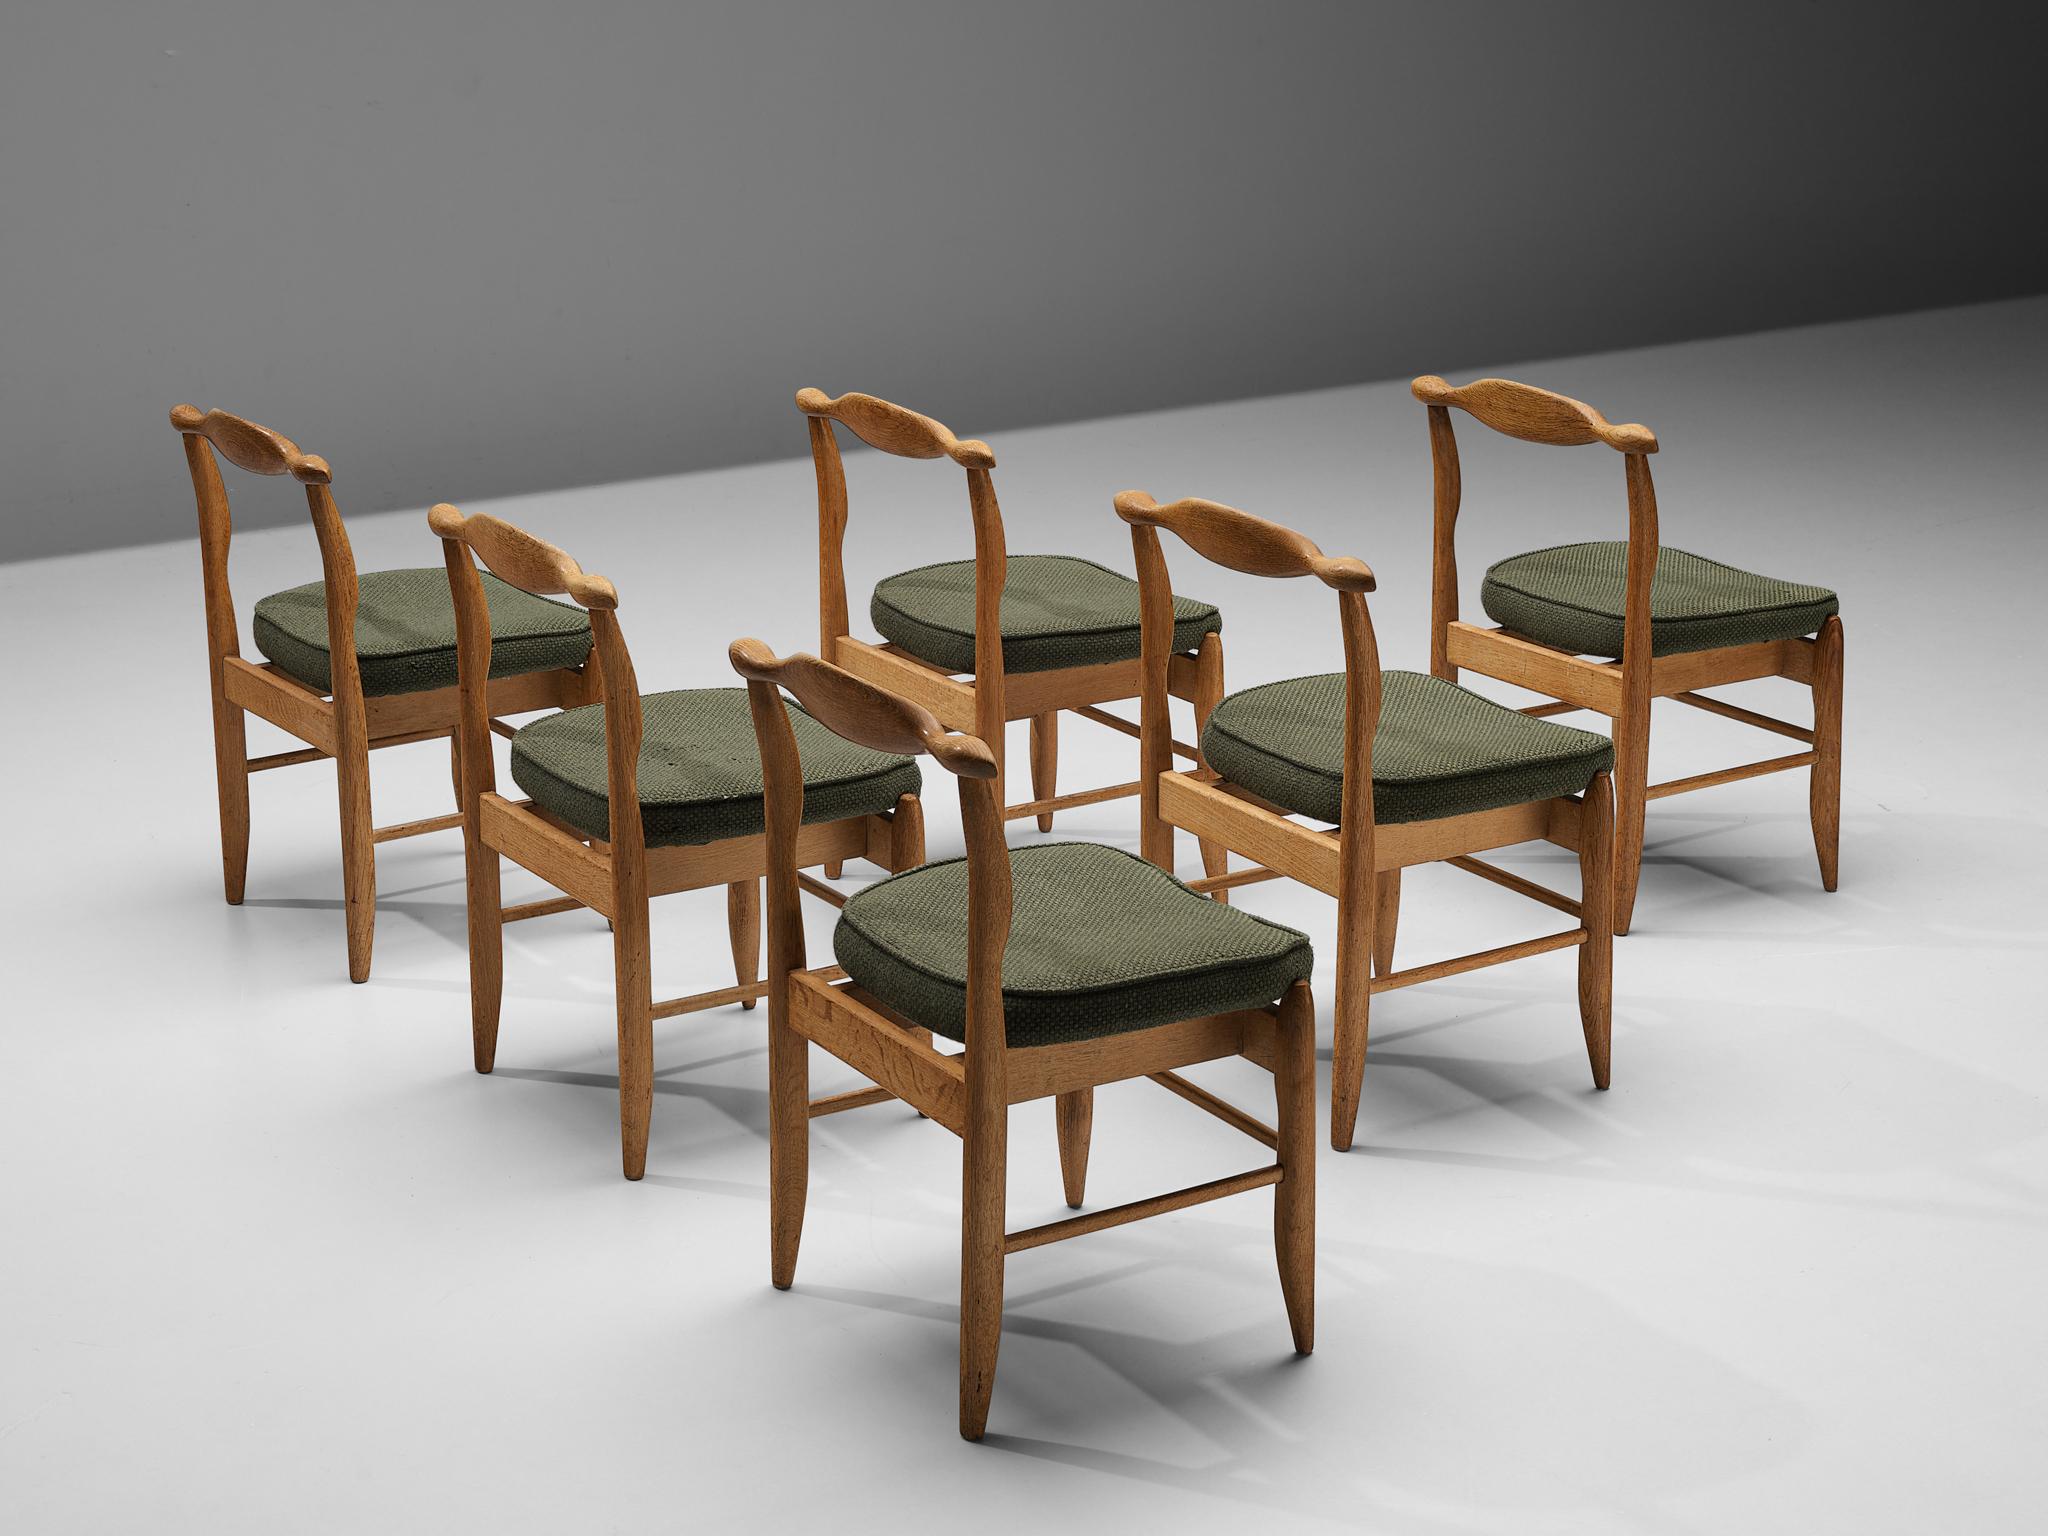 Guillerme et Chambron for Votre Maison, set of six dining chairs, model 'Fumay,' oak and fabric, France, 1960s.

Beautifully shaped chairs in oak by French designer duo Jacques Chambron and Robert Guillerme. These dining chairs show beautiful lines